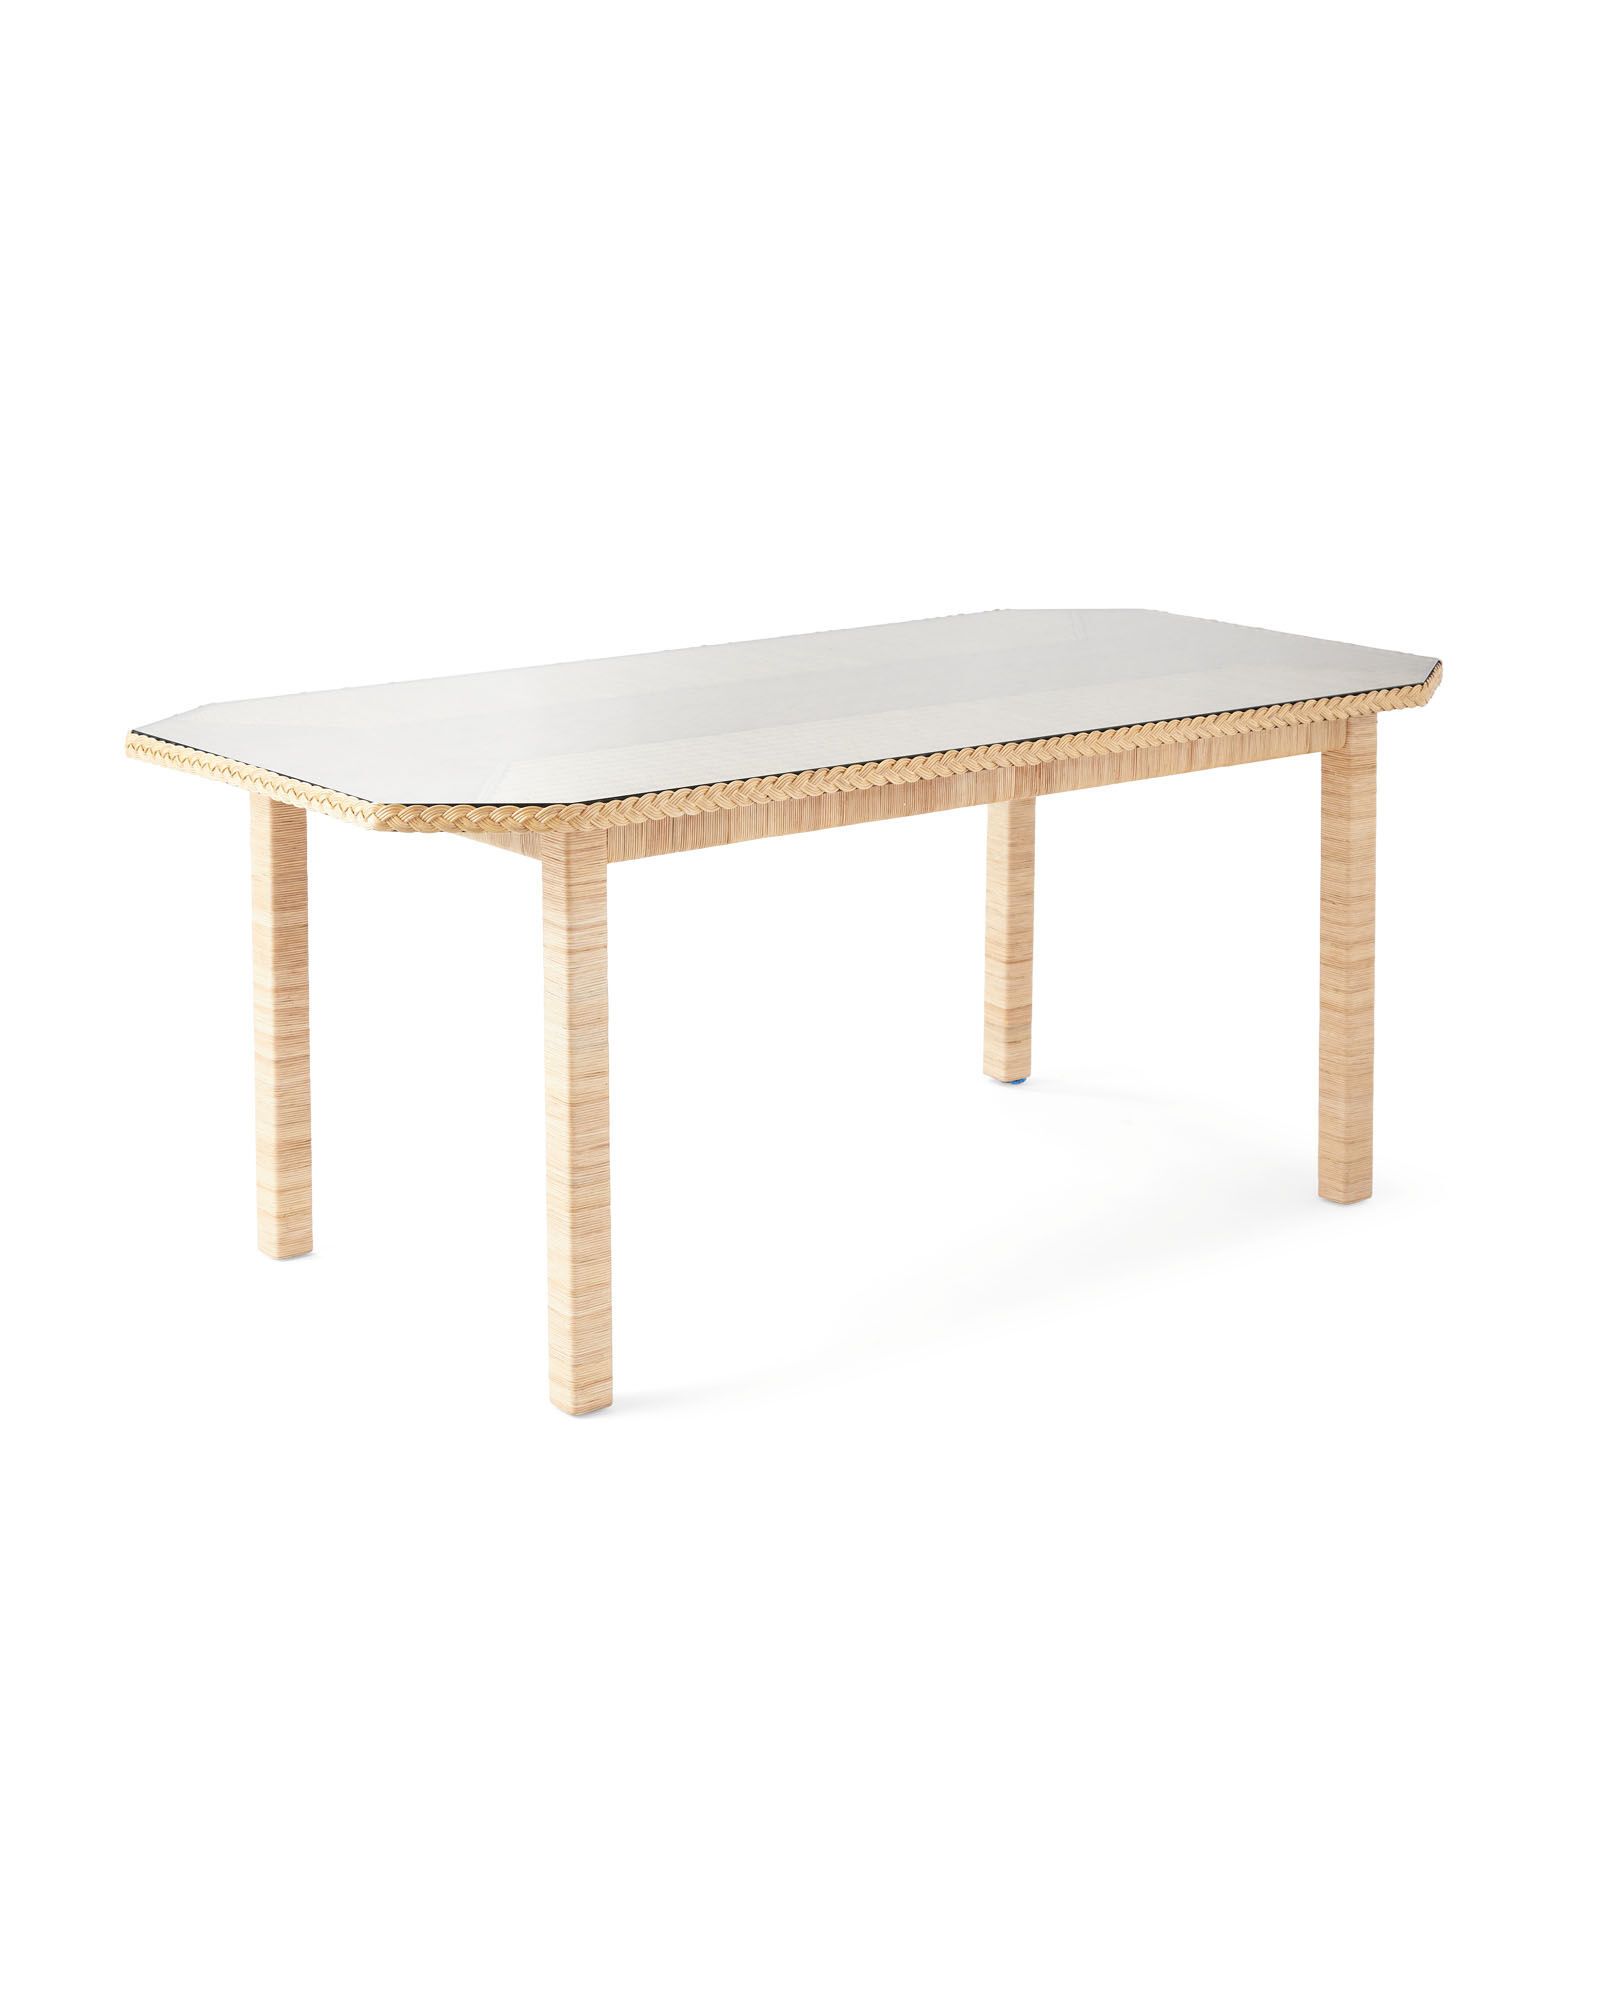 Hammonds Dining Table | Serena and Lily